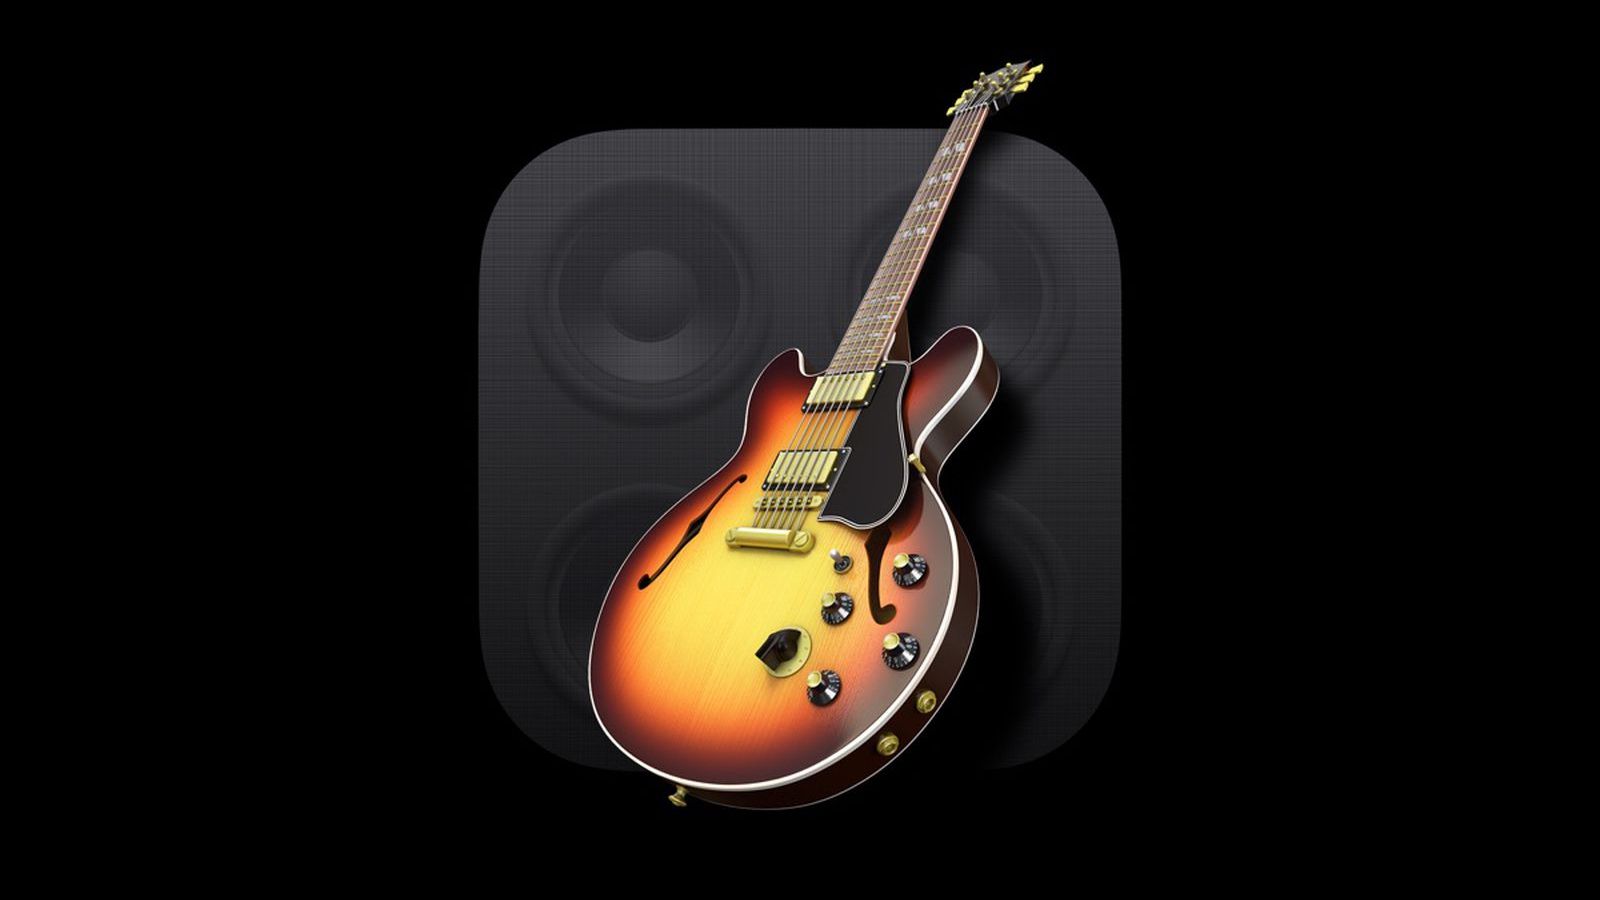 GarageBand for Mac Updated With Important Security Fix